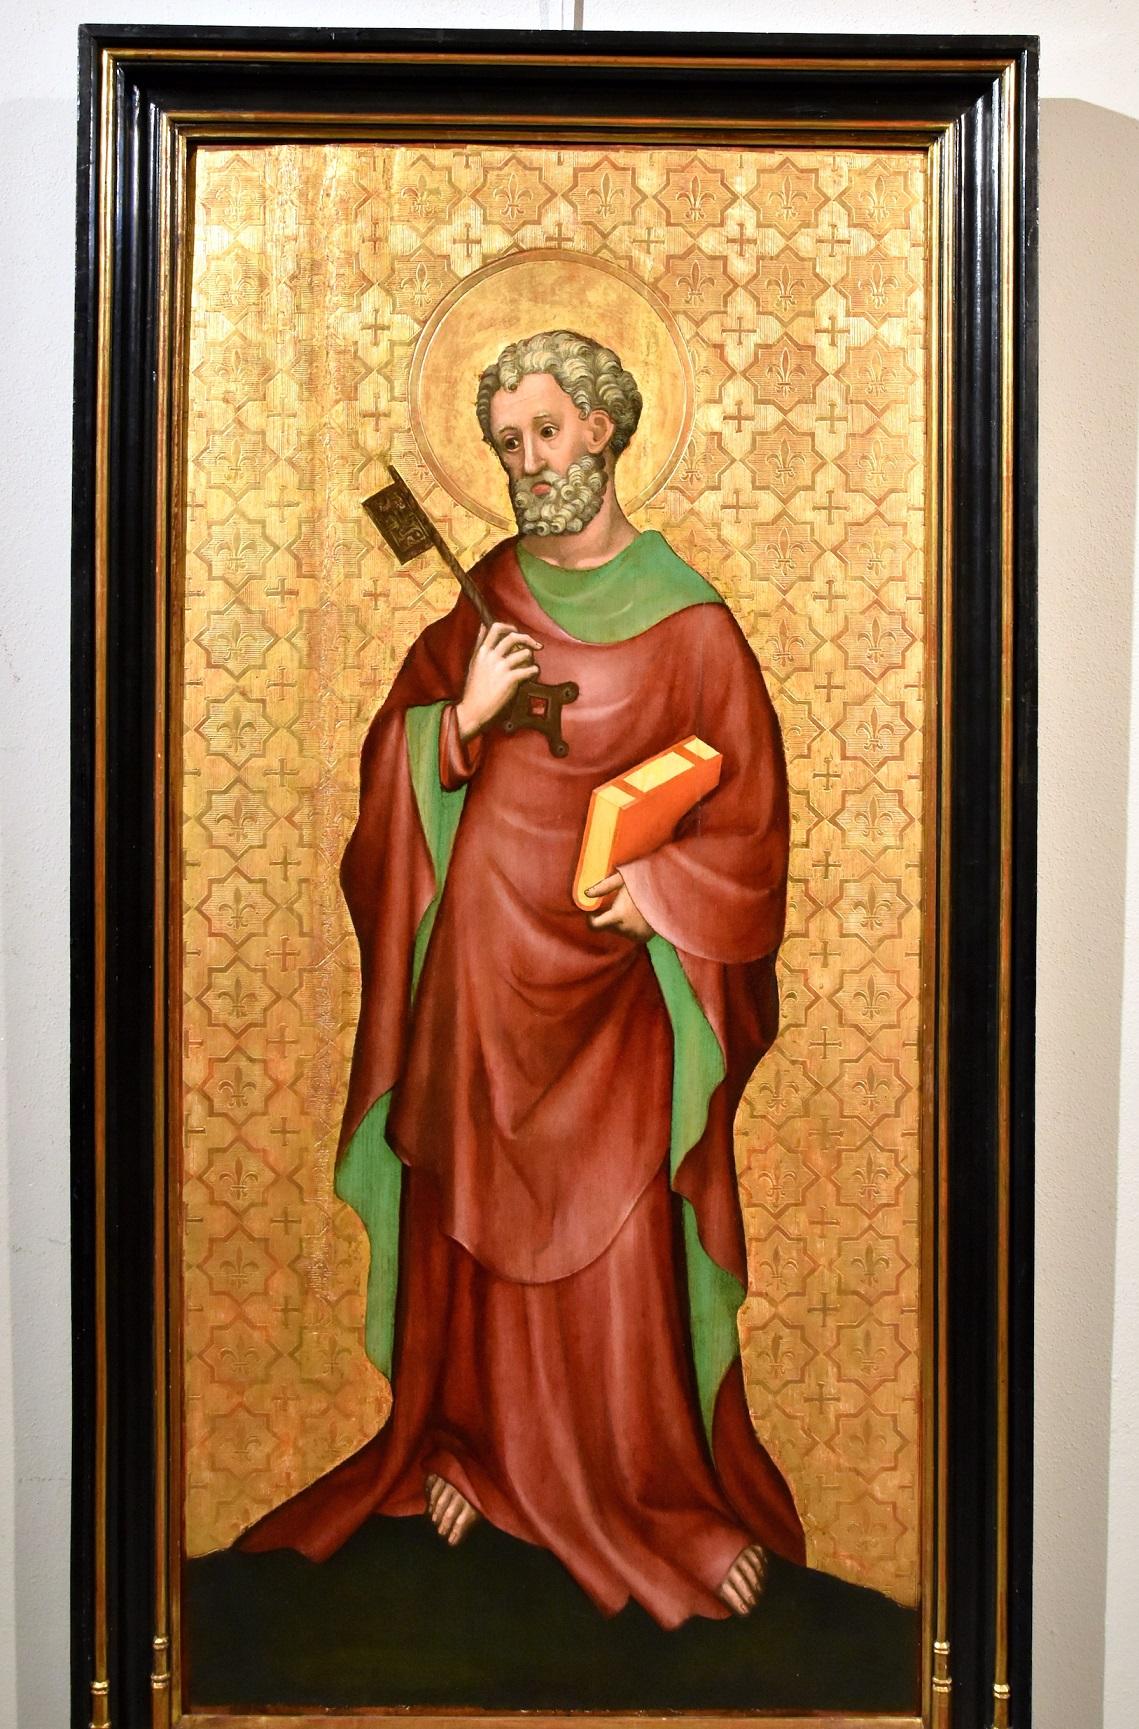 Late Gothic, German (15th century)
Painter of the Cologne school, circle of Stephan Lochner (Meersburg, around 1400 - Cologne 1451)
Panel (compartment of a polyptych) with gold background depicting 'St. Peter the Apostle'

Oil on panel with a gold